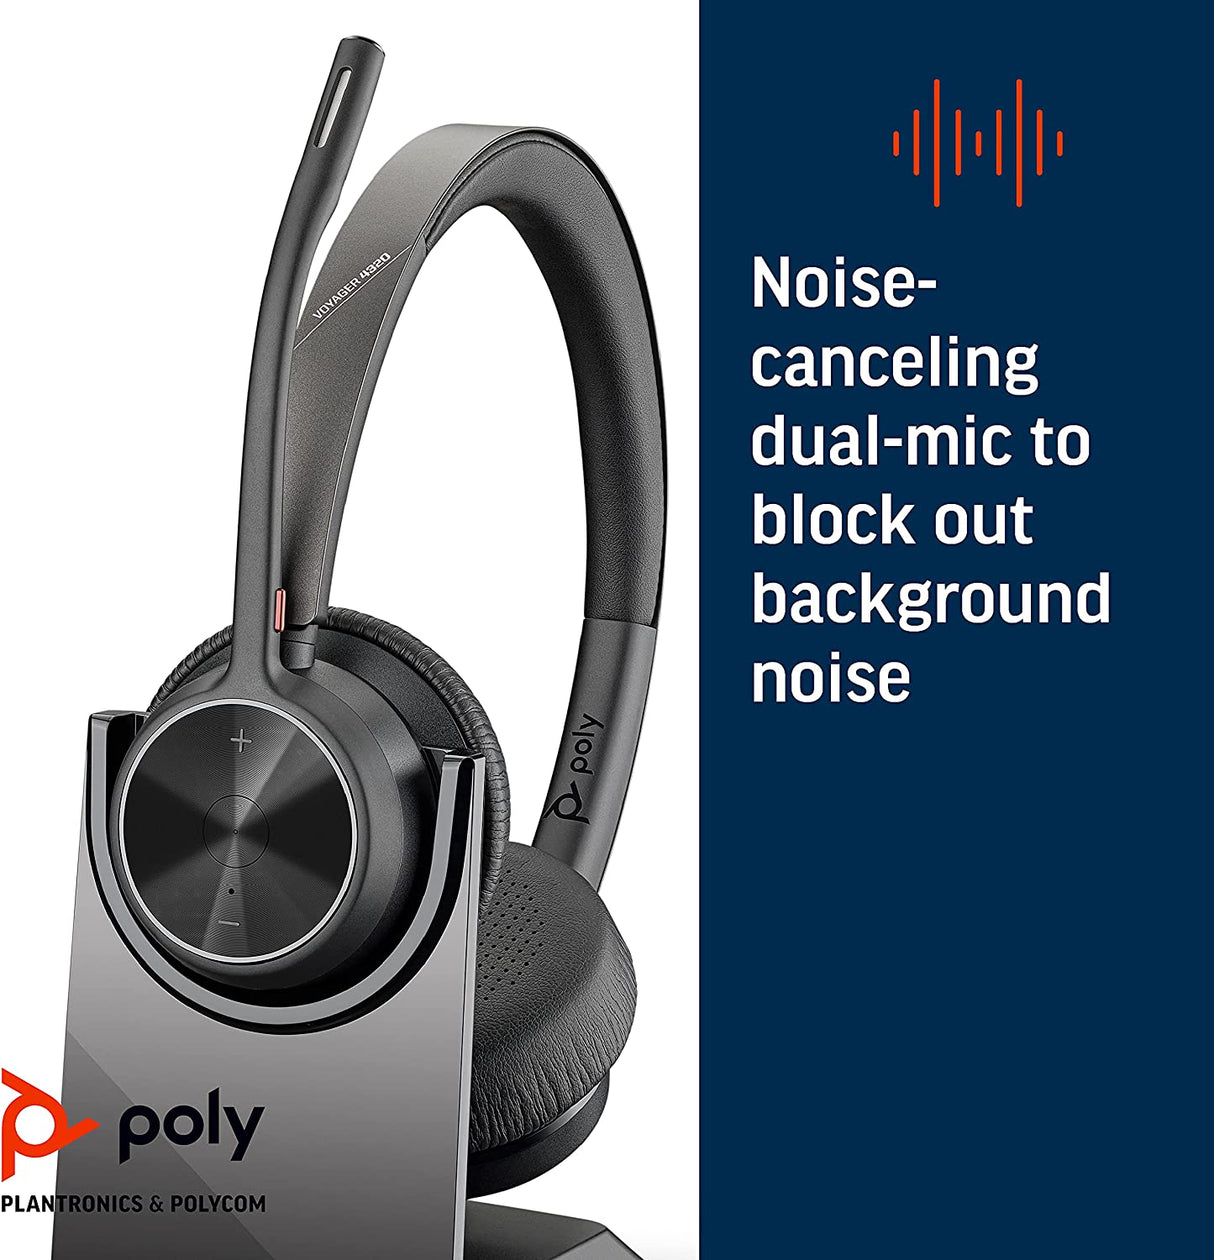 Poly - Voyager 4320 UC Wireless Headset + Charge Stand (Plantronics) - Headphones with Boom Mic - Connect to PC/Mac via USB-A Bluetooth Adapter, Cell Phone via Bluetooth - Works with Teams, Zoom &amp;More Headset + Charge Stand USB-A